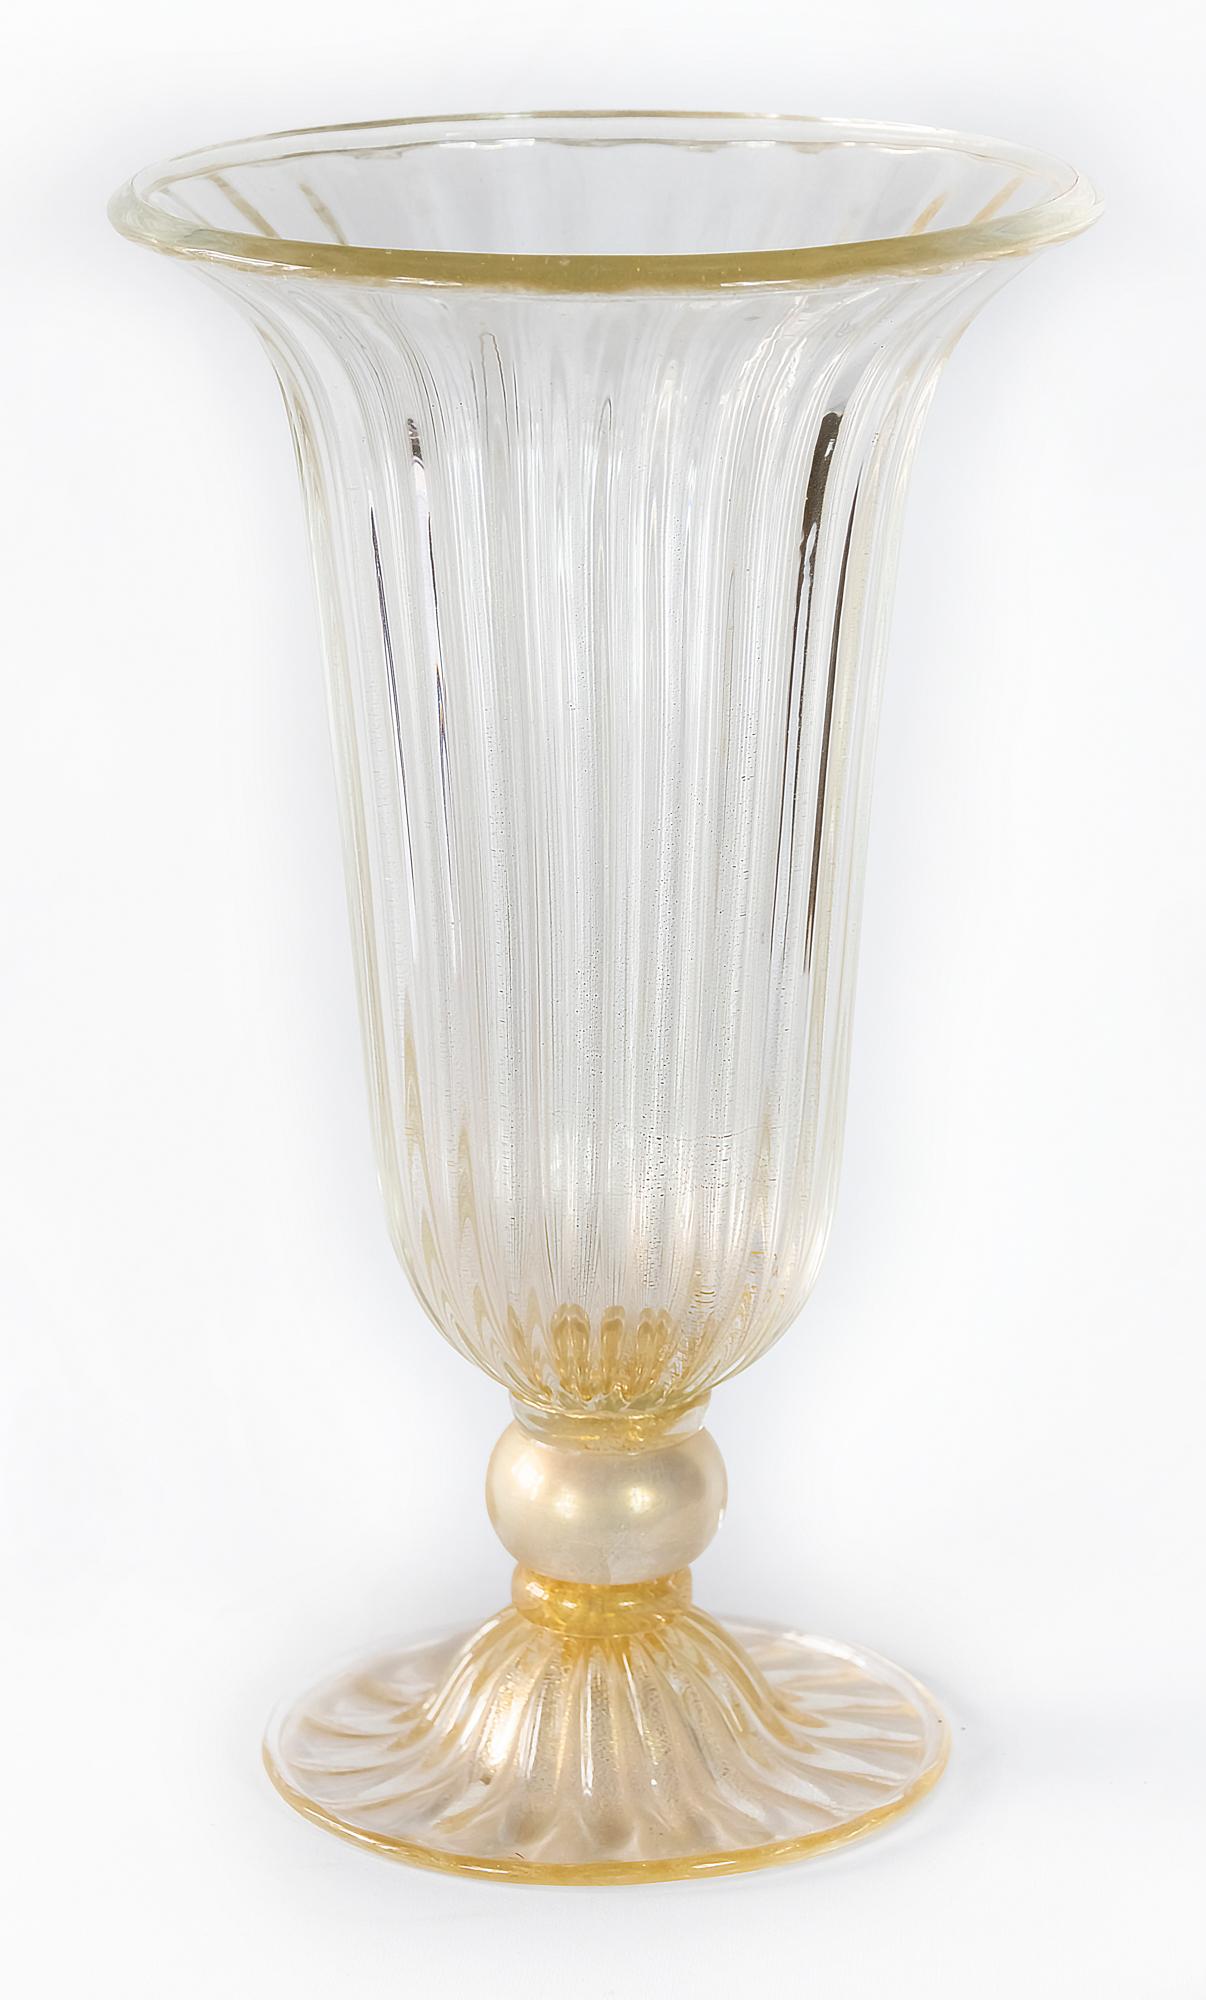 Italian handmade Murano glass vase by Alberto Dona.
This vase is created in the form of goblet. 
Murano glass is clear to yellow with inside gold dust.
Signed Alberto Dona Murano.